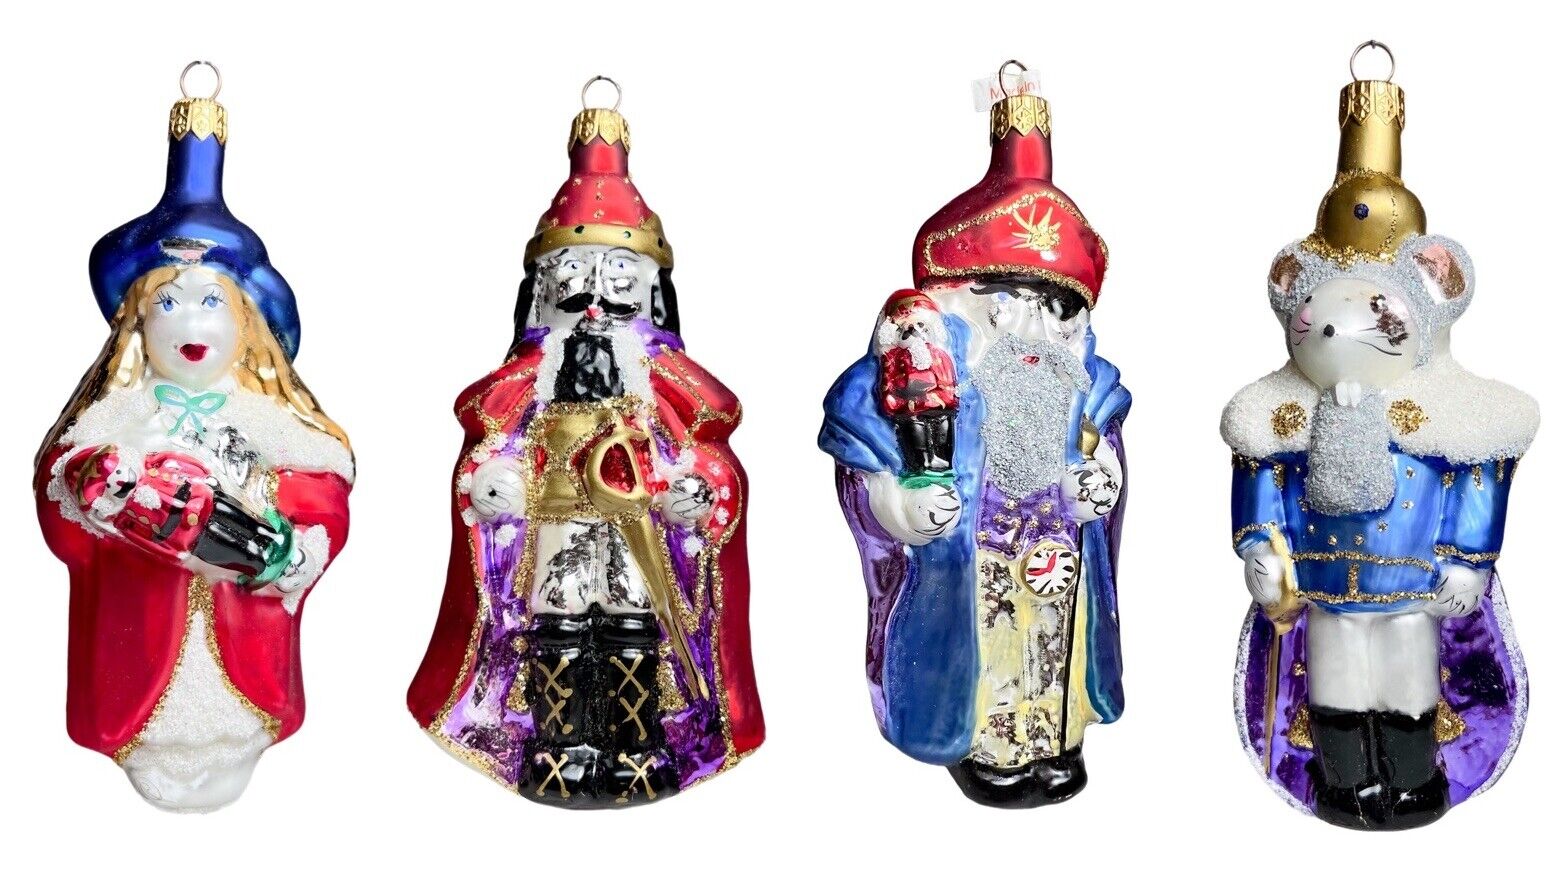 Lot of 4 Vintage Poland Glass Christmas Ornaments Mouse King/Wisemen 6